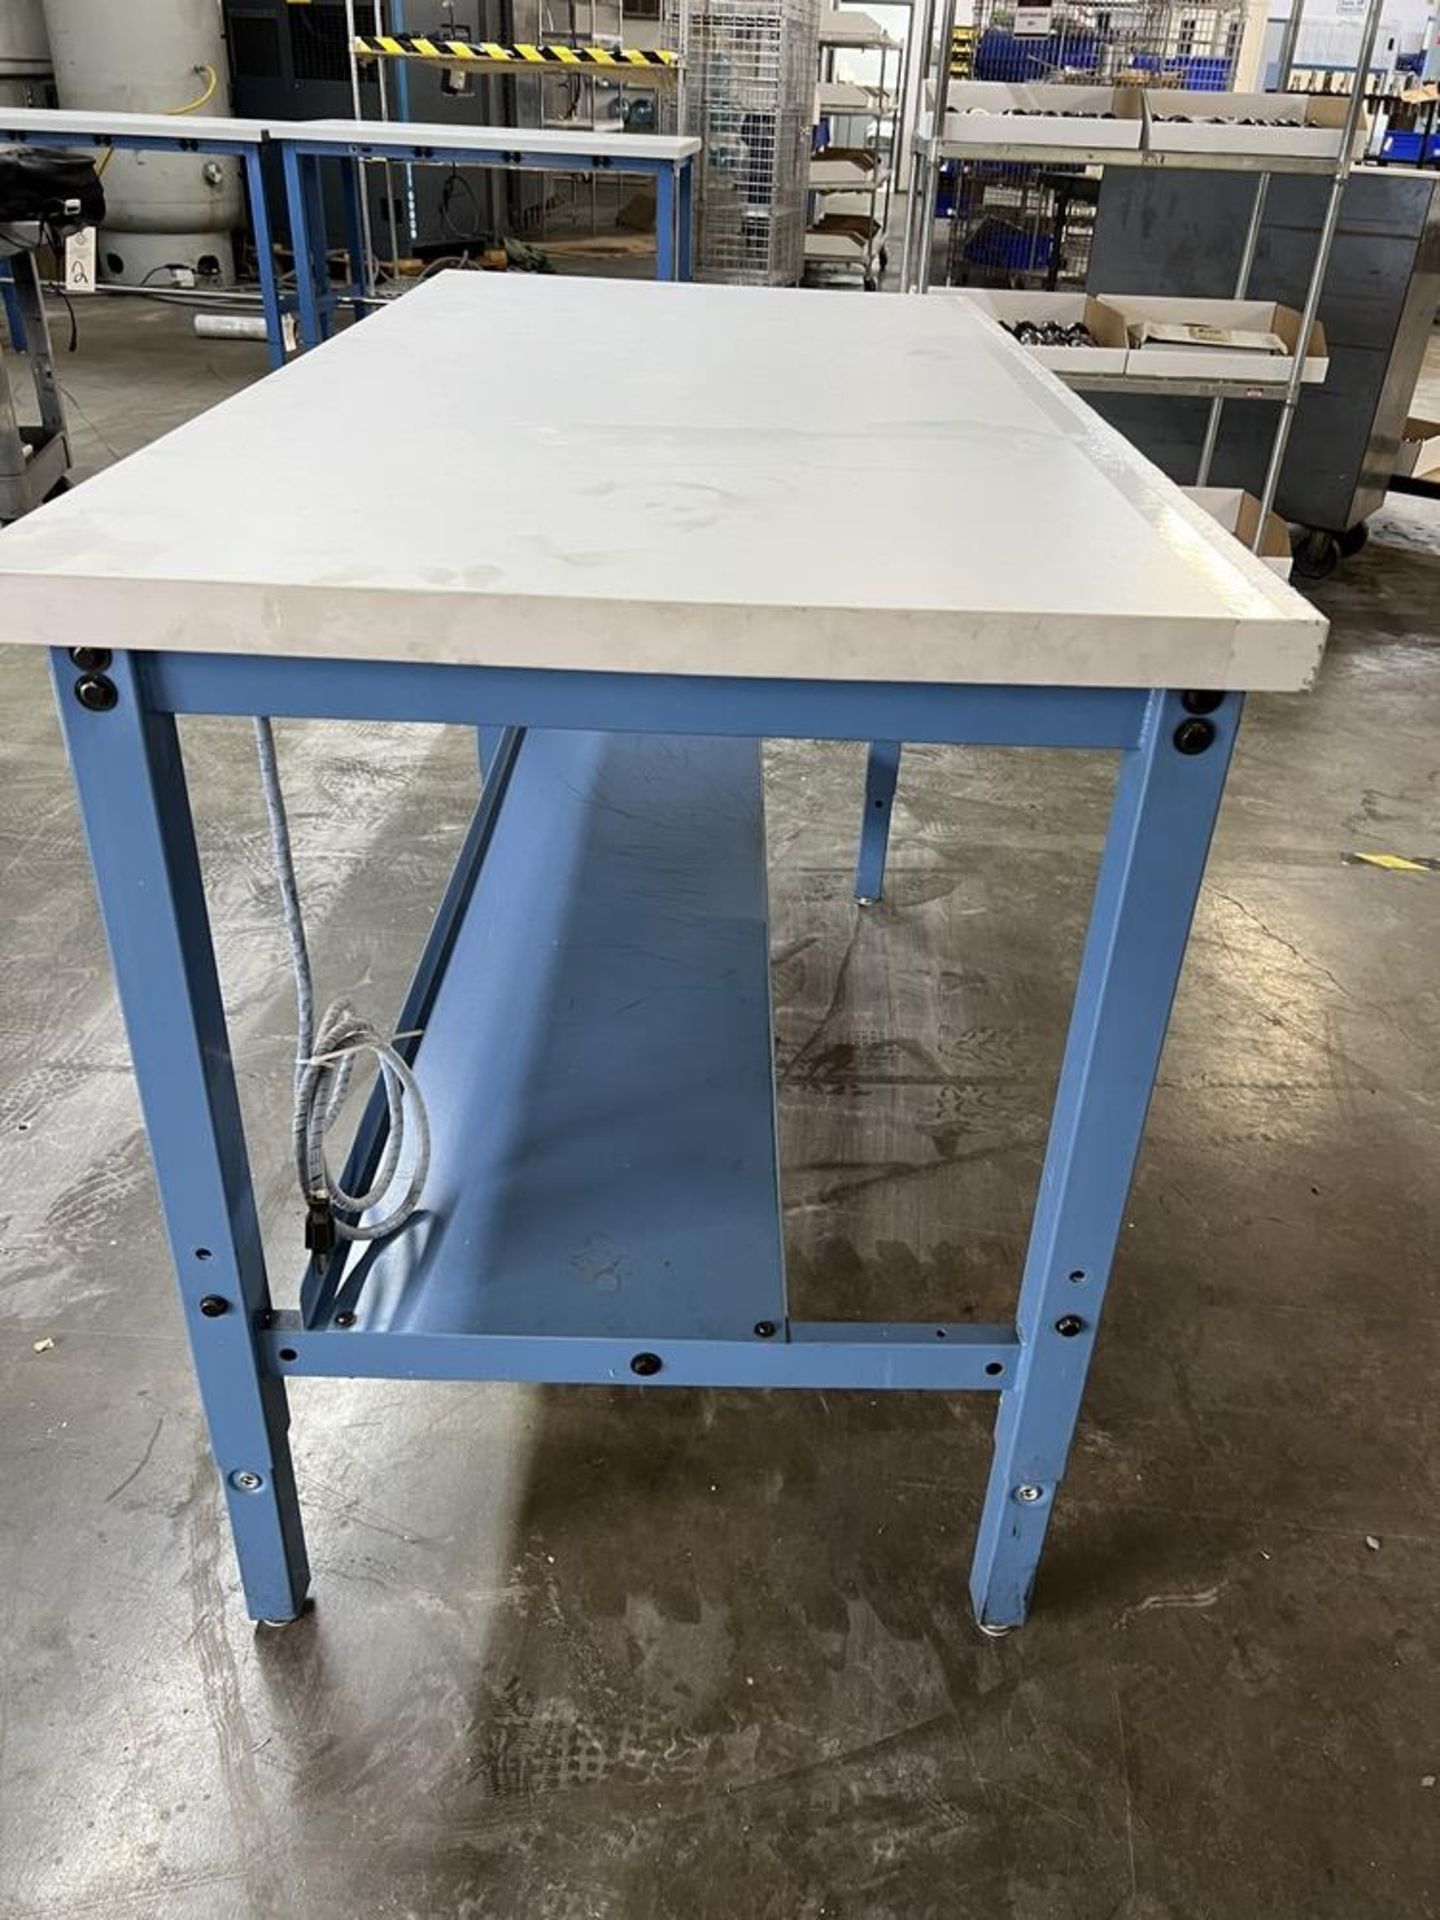 Global Industrial Adjustable Work Table With Power Strip 60" x 30" x 30" - Image 3 of 5